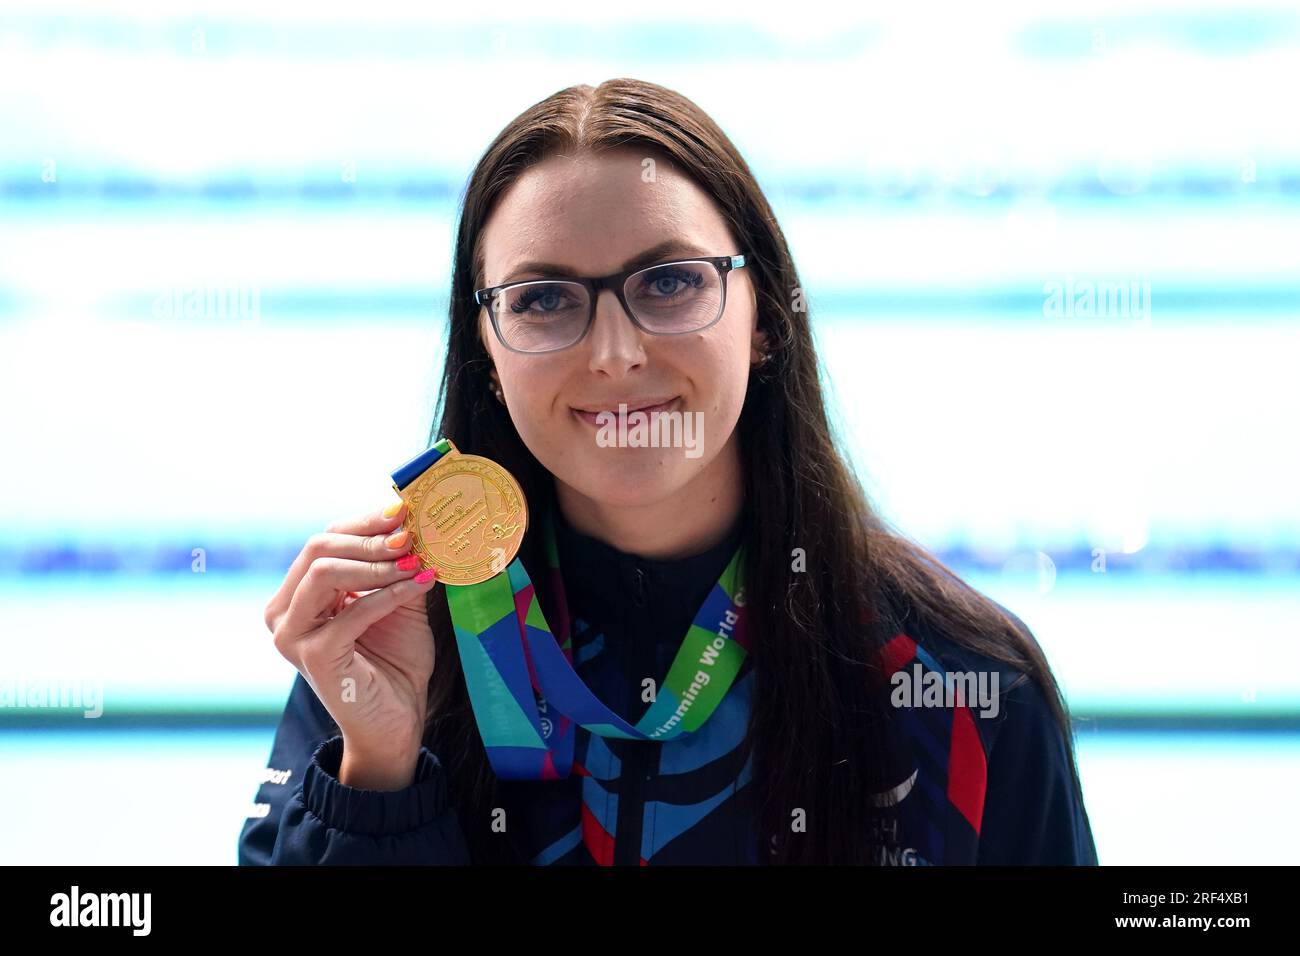 Great Britains Jessica Jane Applegate With Their Gold Medal For The Womens 200m Freestyle S14